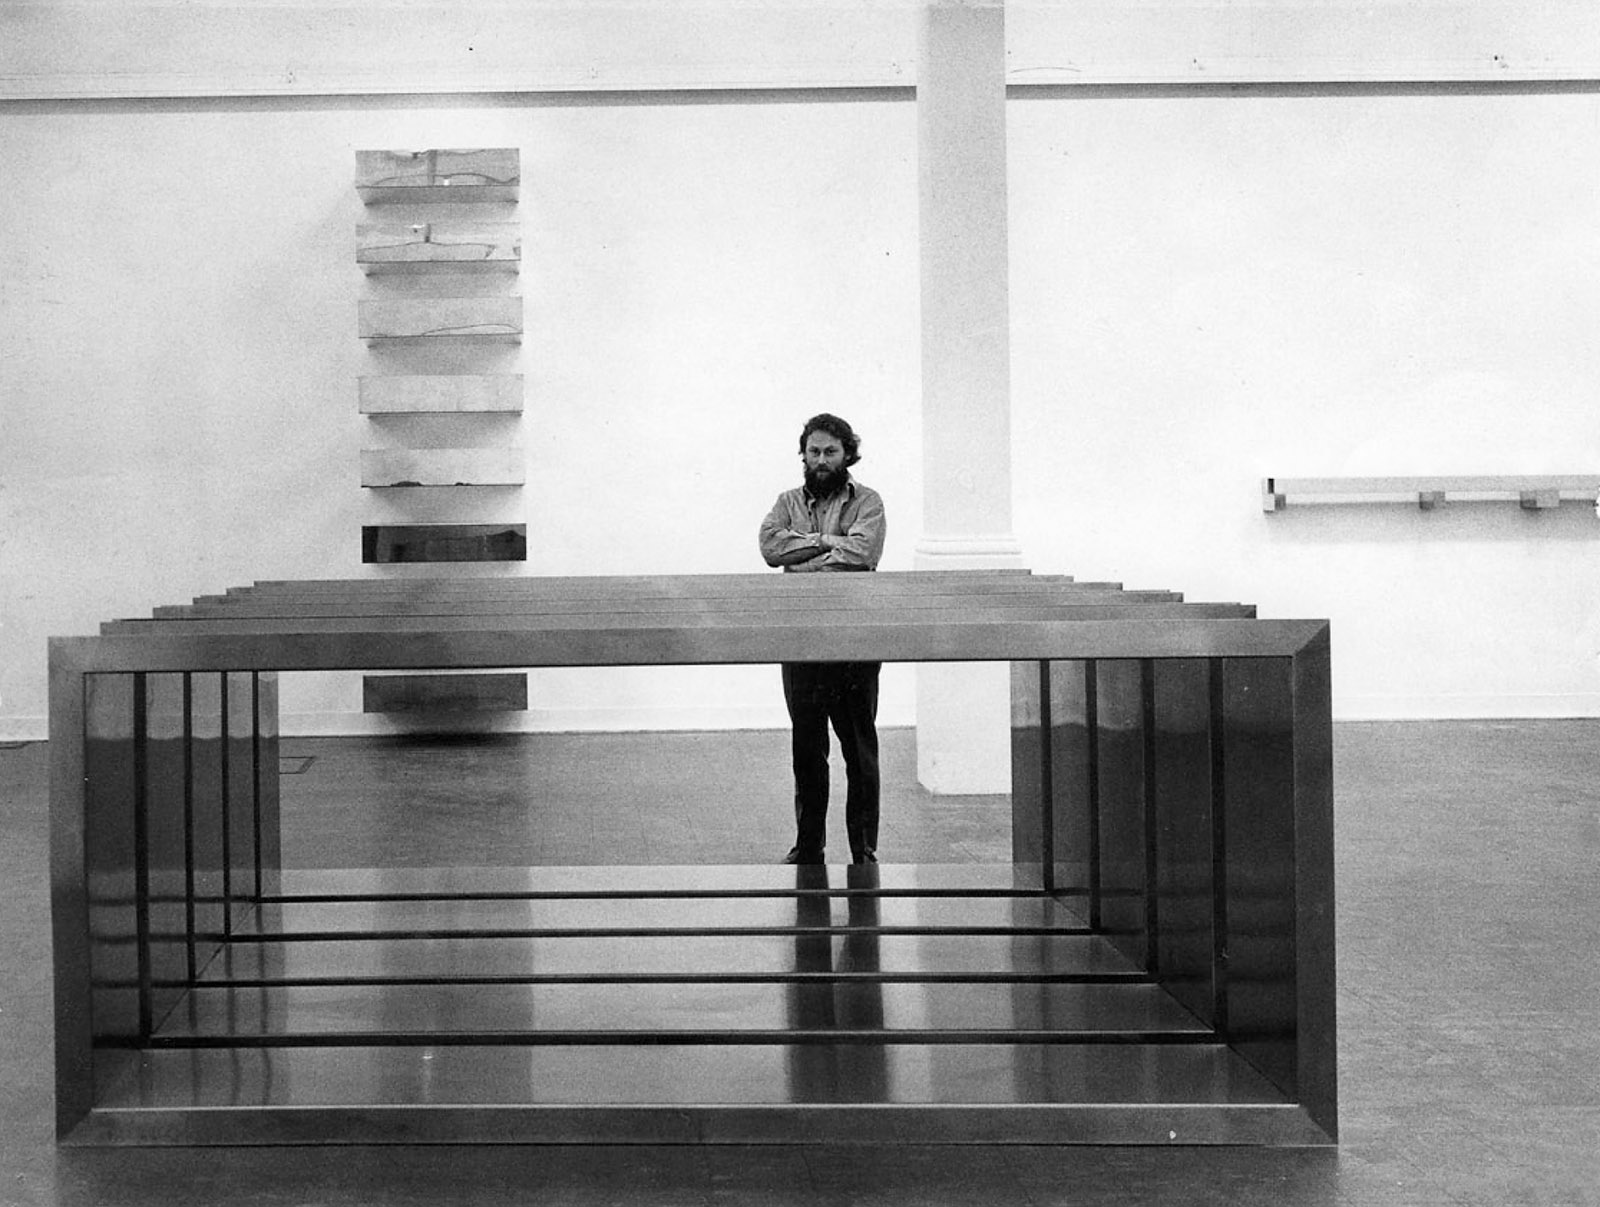 Donald Judd at an exhibition of his work at the Whitechapel Gallery, London, 1970